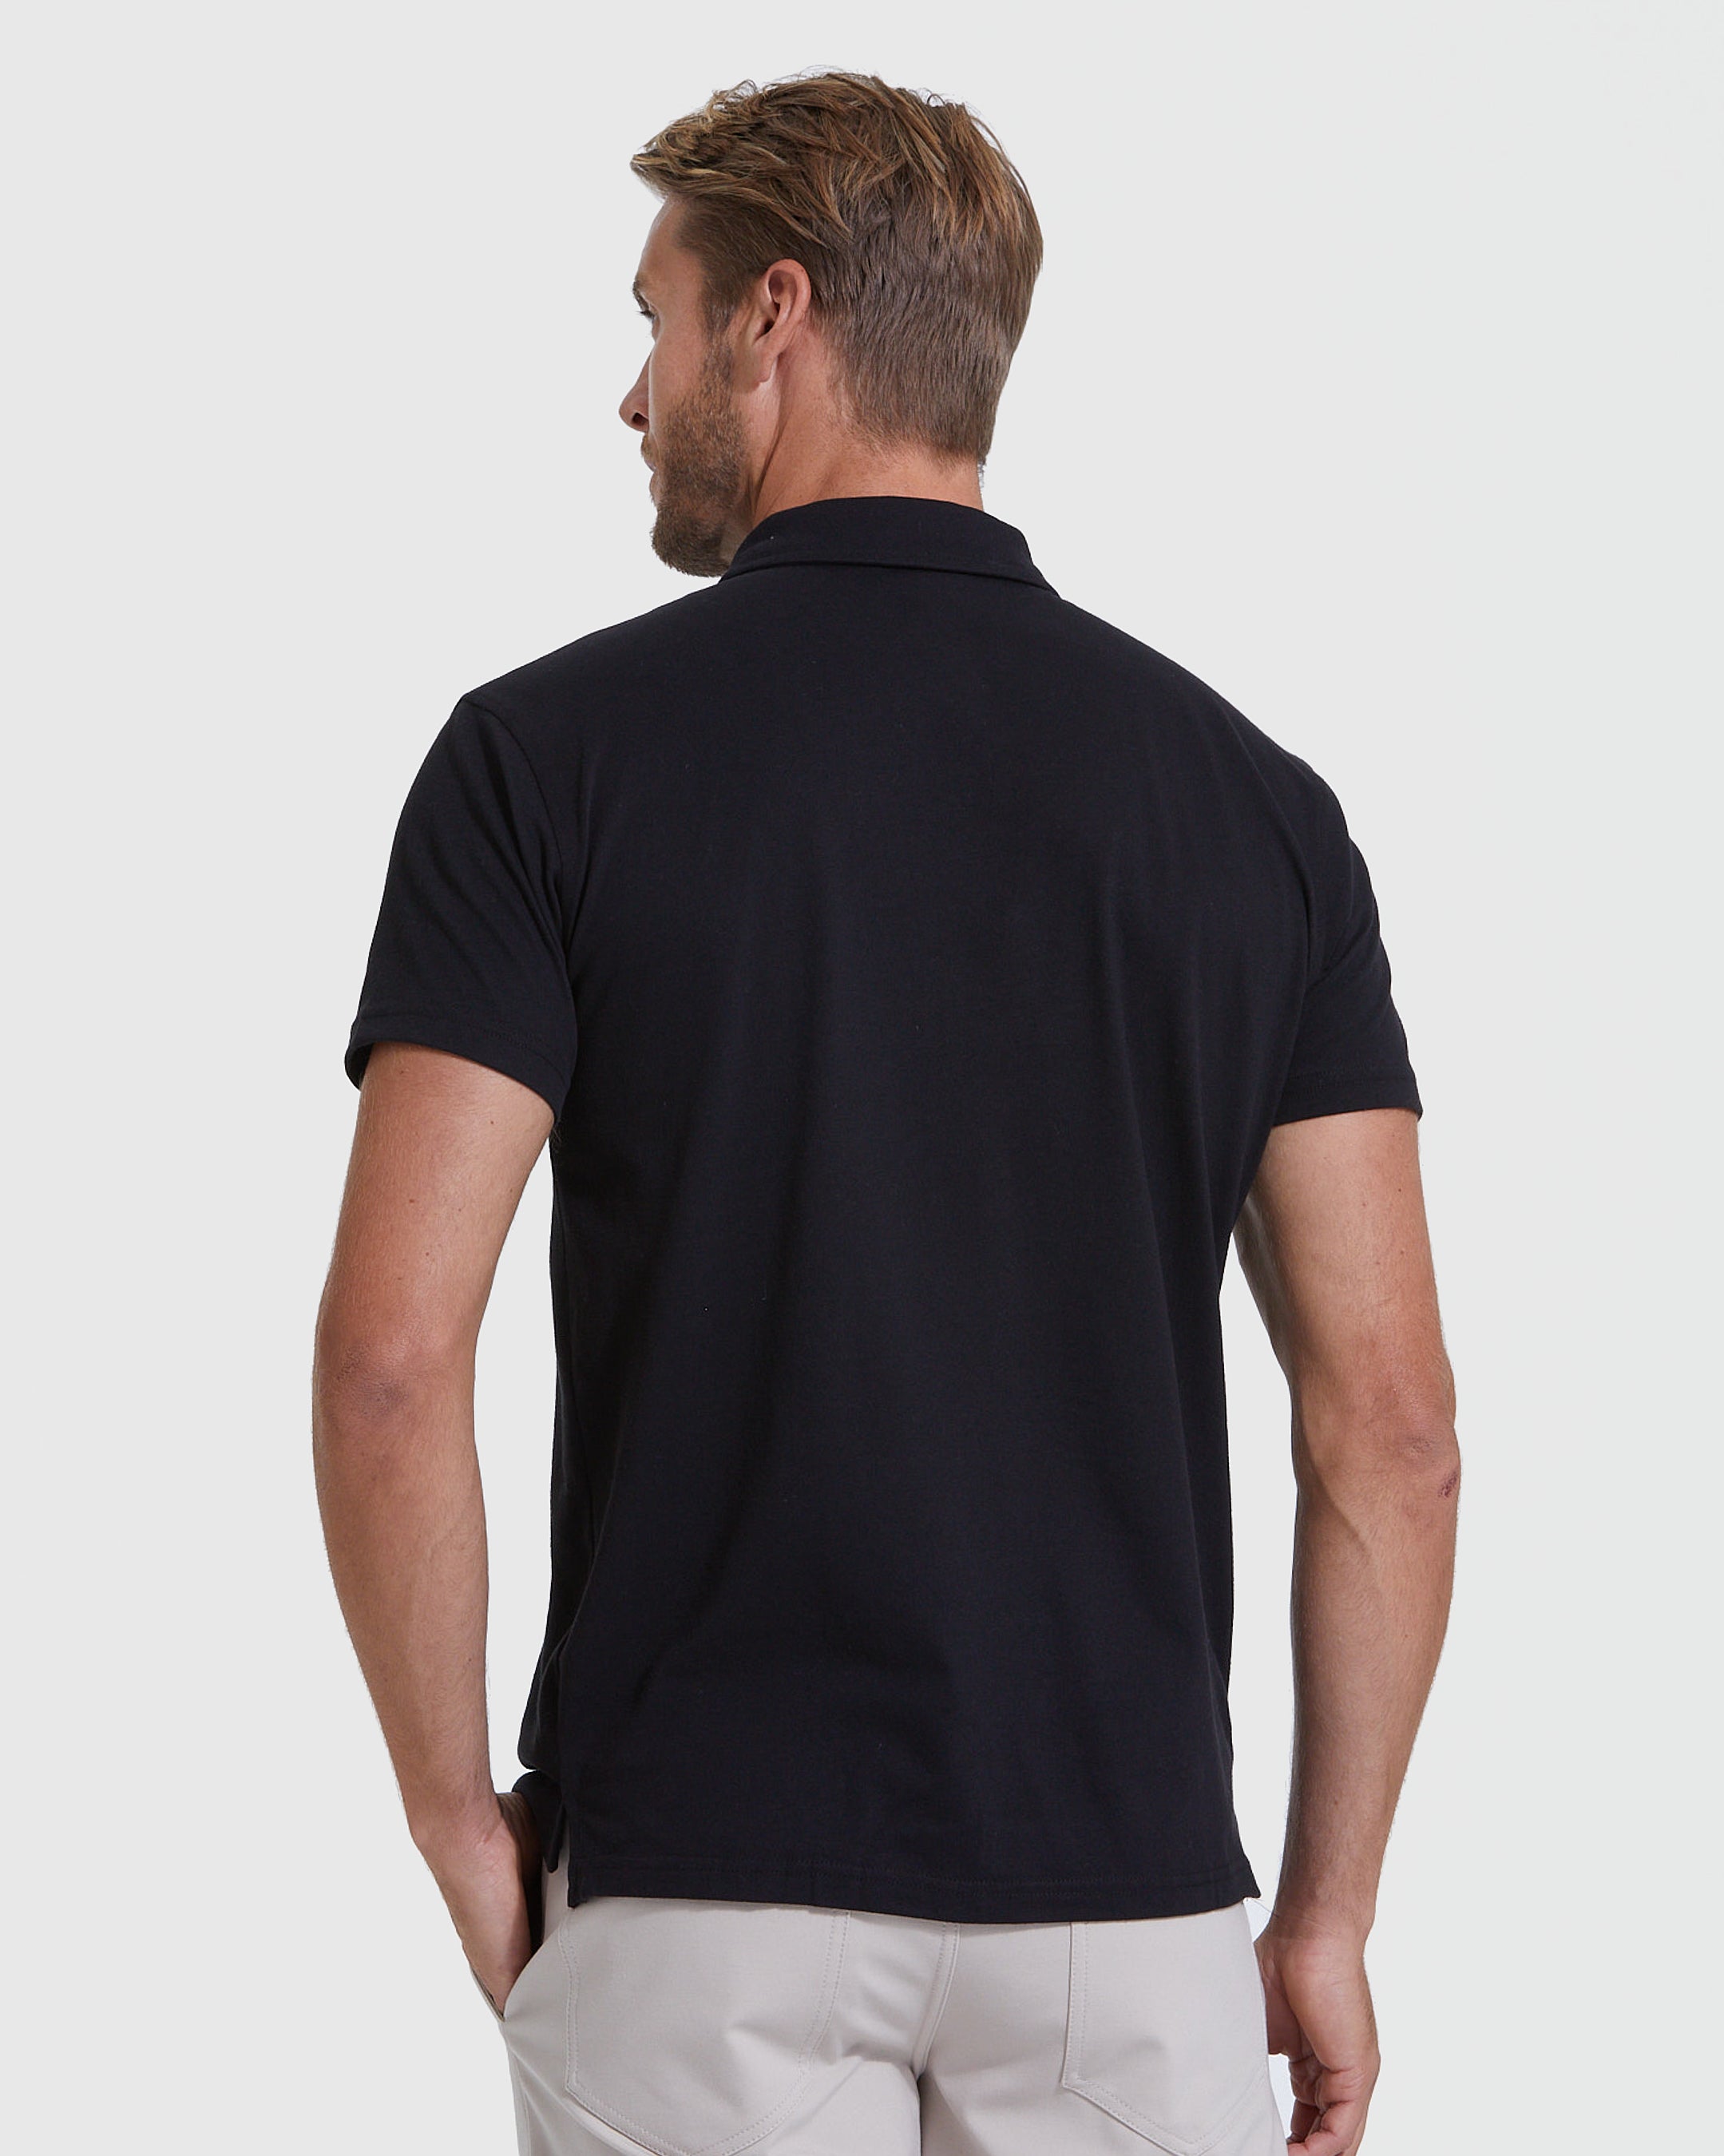 Buy Best Polo T Shirts at FASO